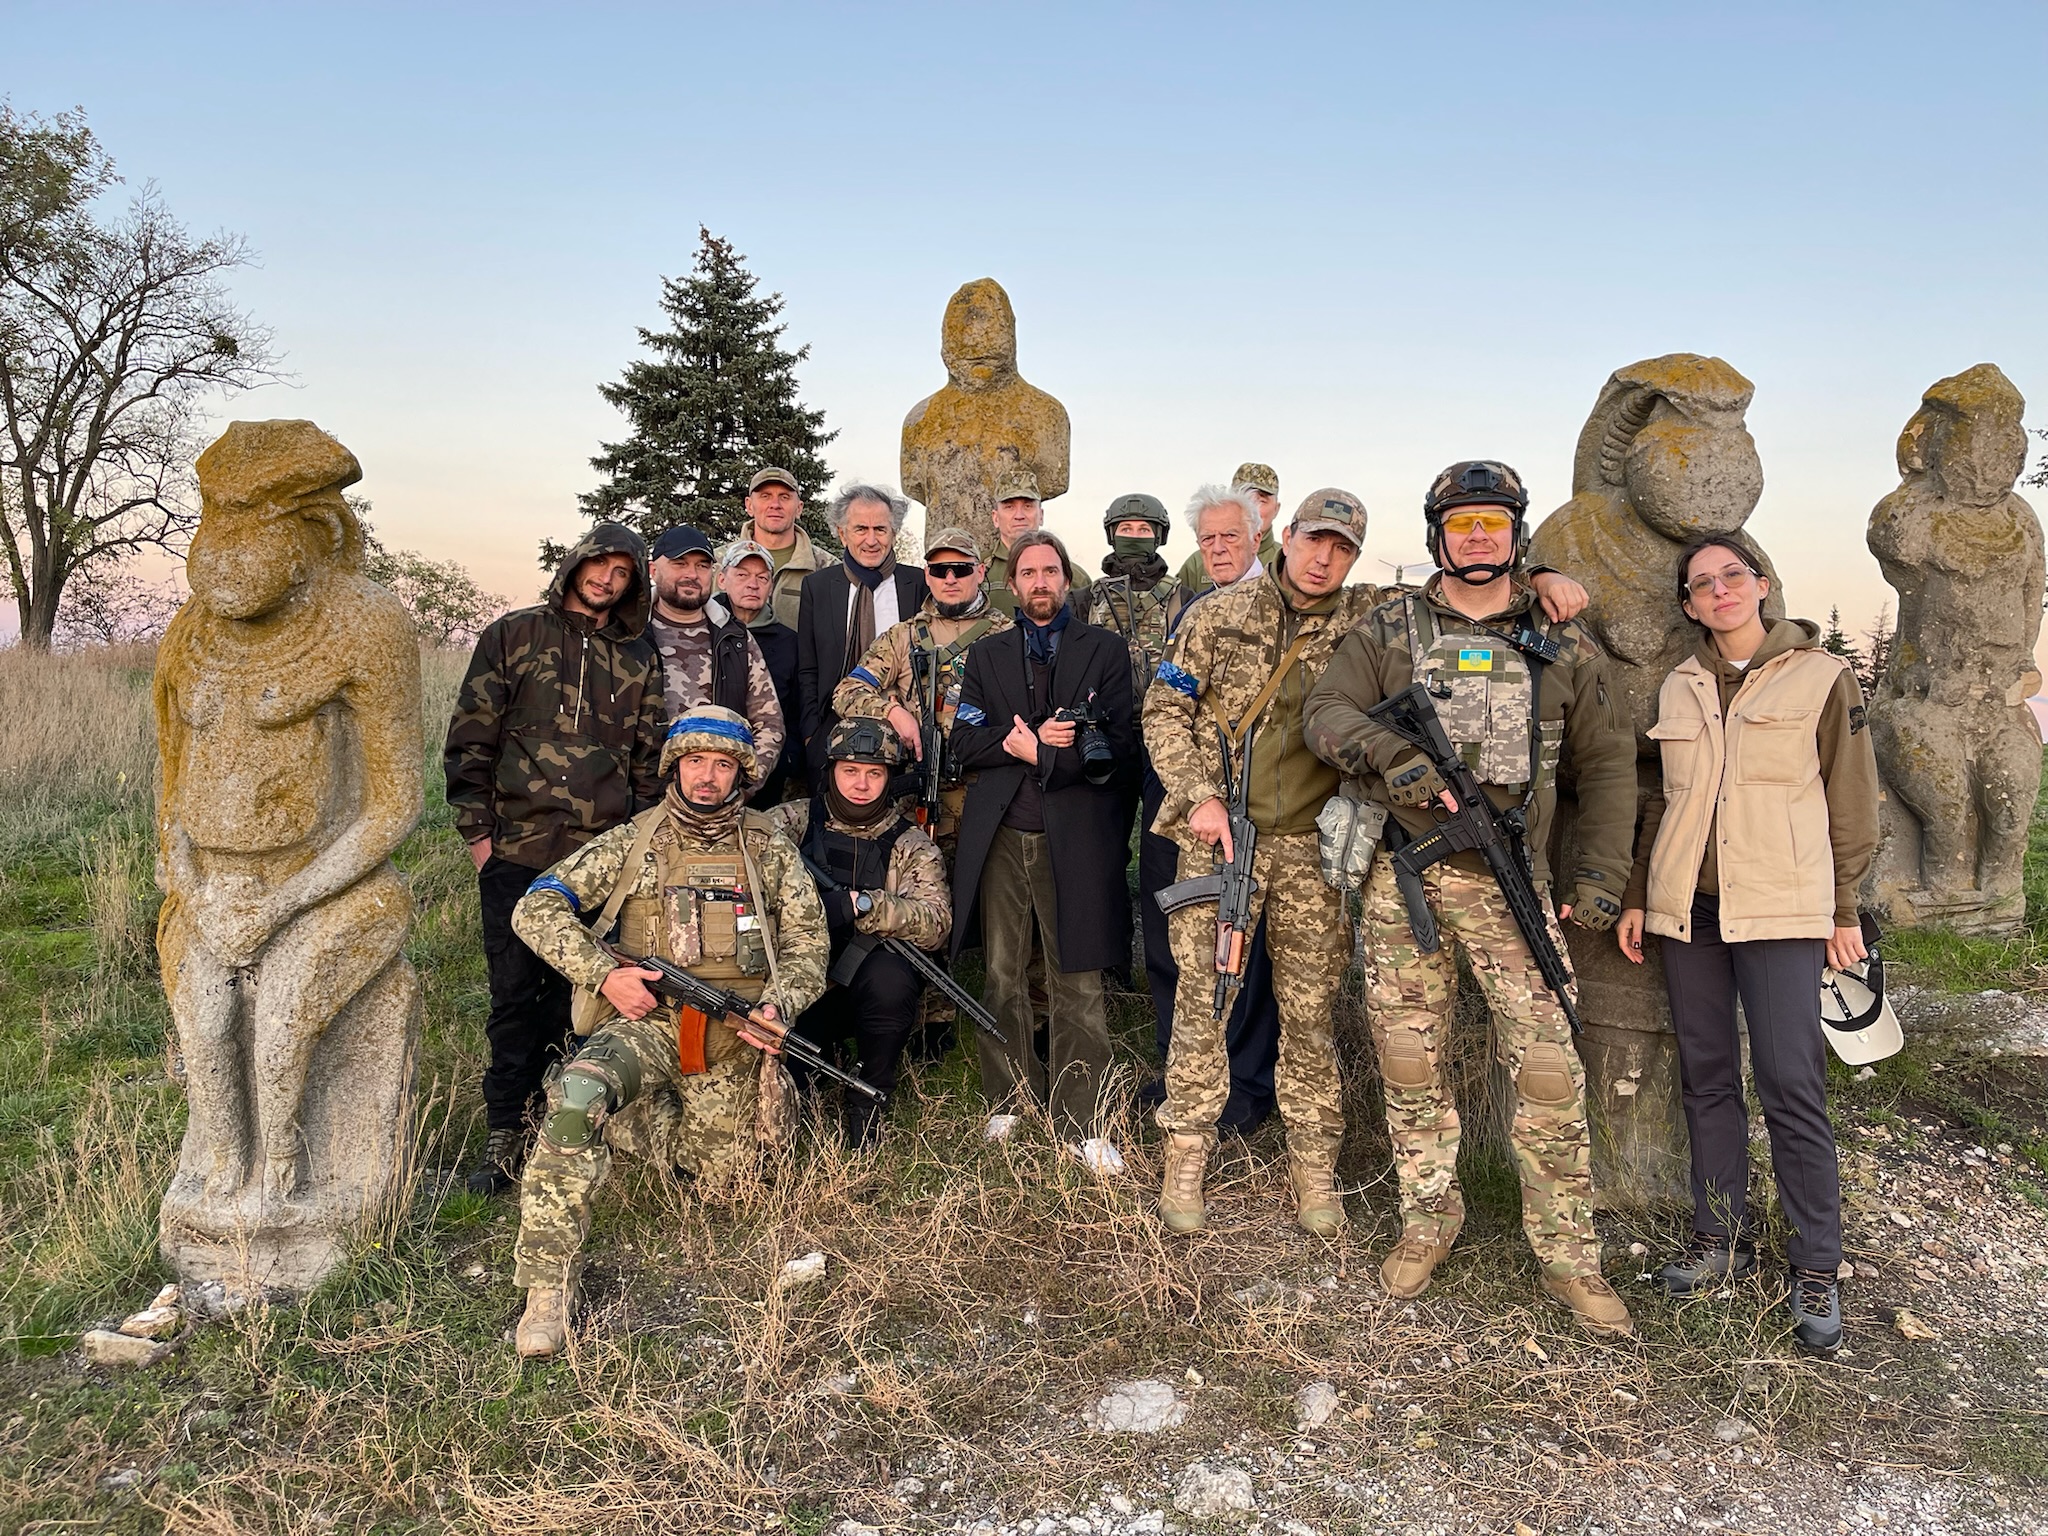 Bernard-Henri Lévy with his team and Ukrainian soldiers at the gates of Izium, on top of the Kremenets hills, in the middle of the Polovtsian Babas, a kind of nomadic Amazons in struggle